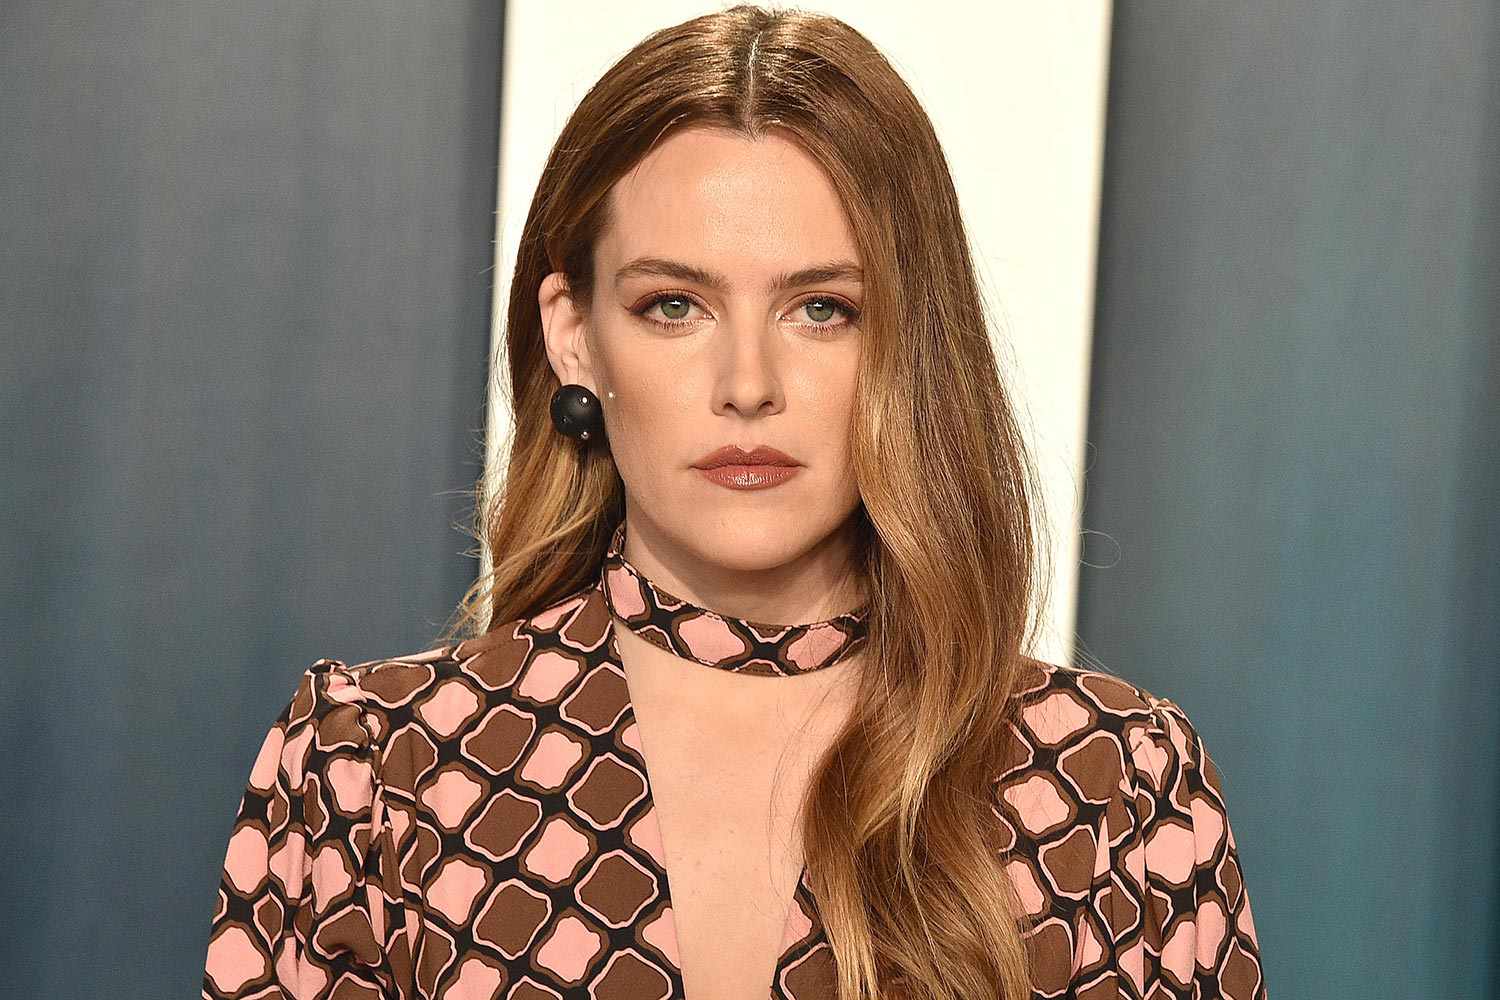 Riley Keough wearing a pink and brown coat